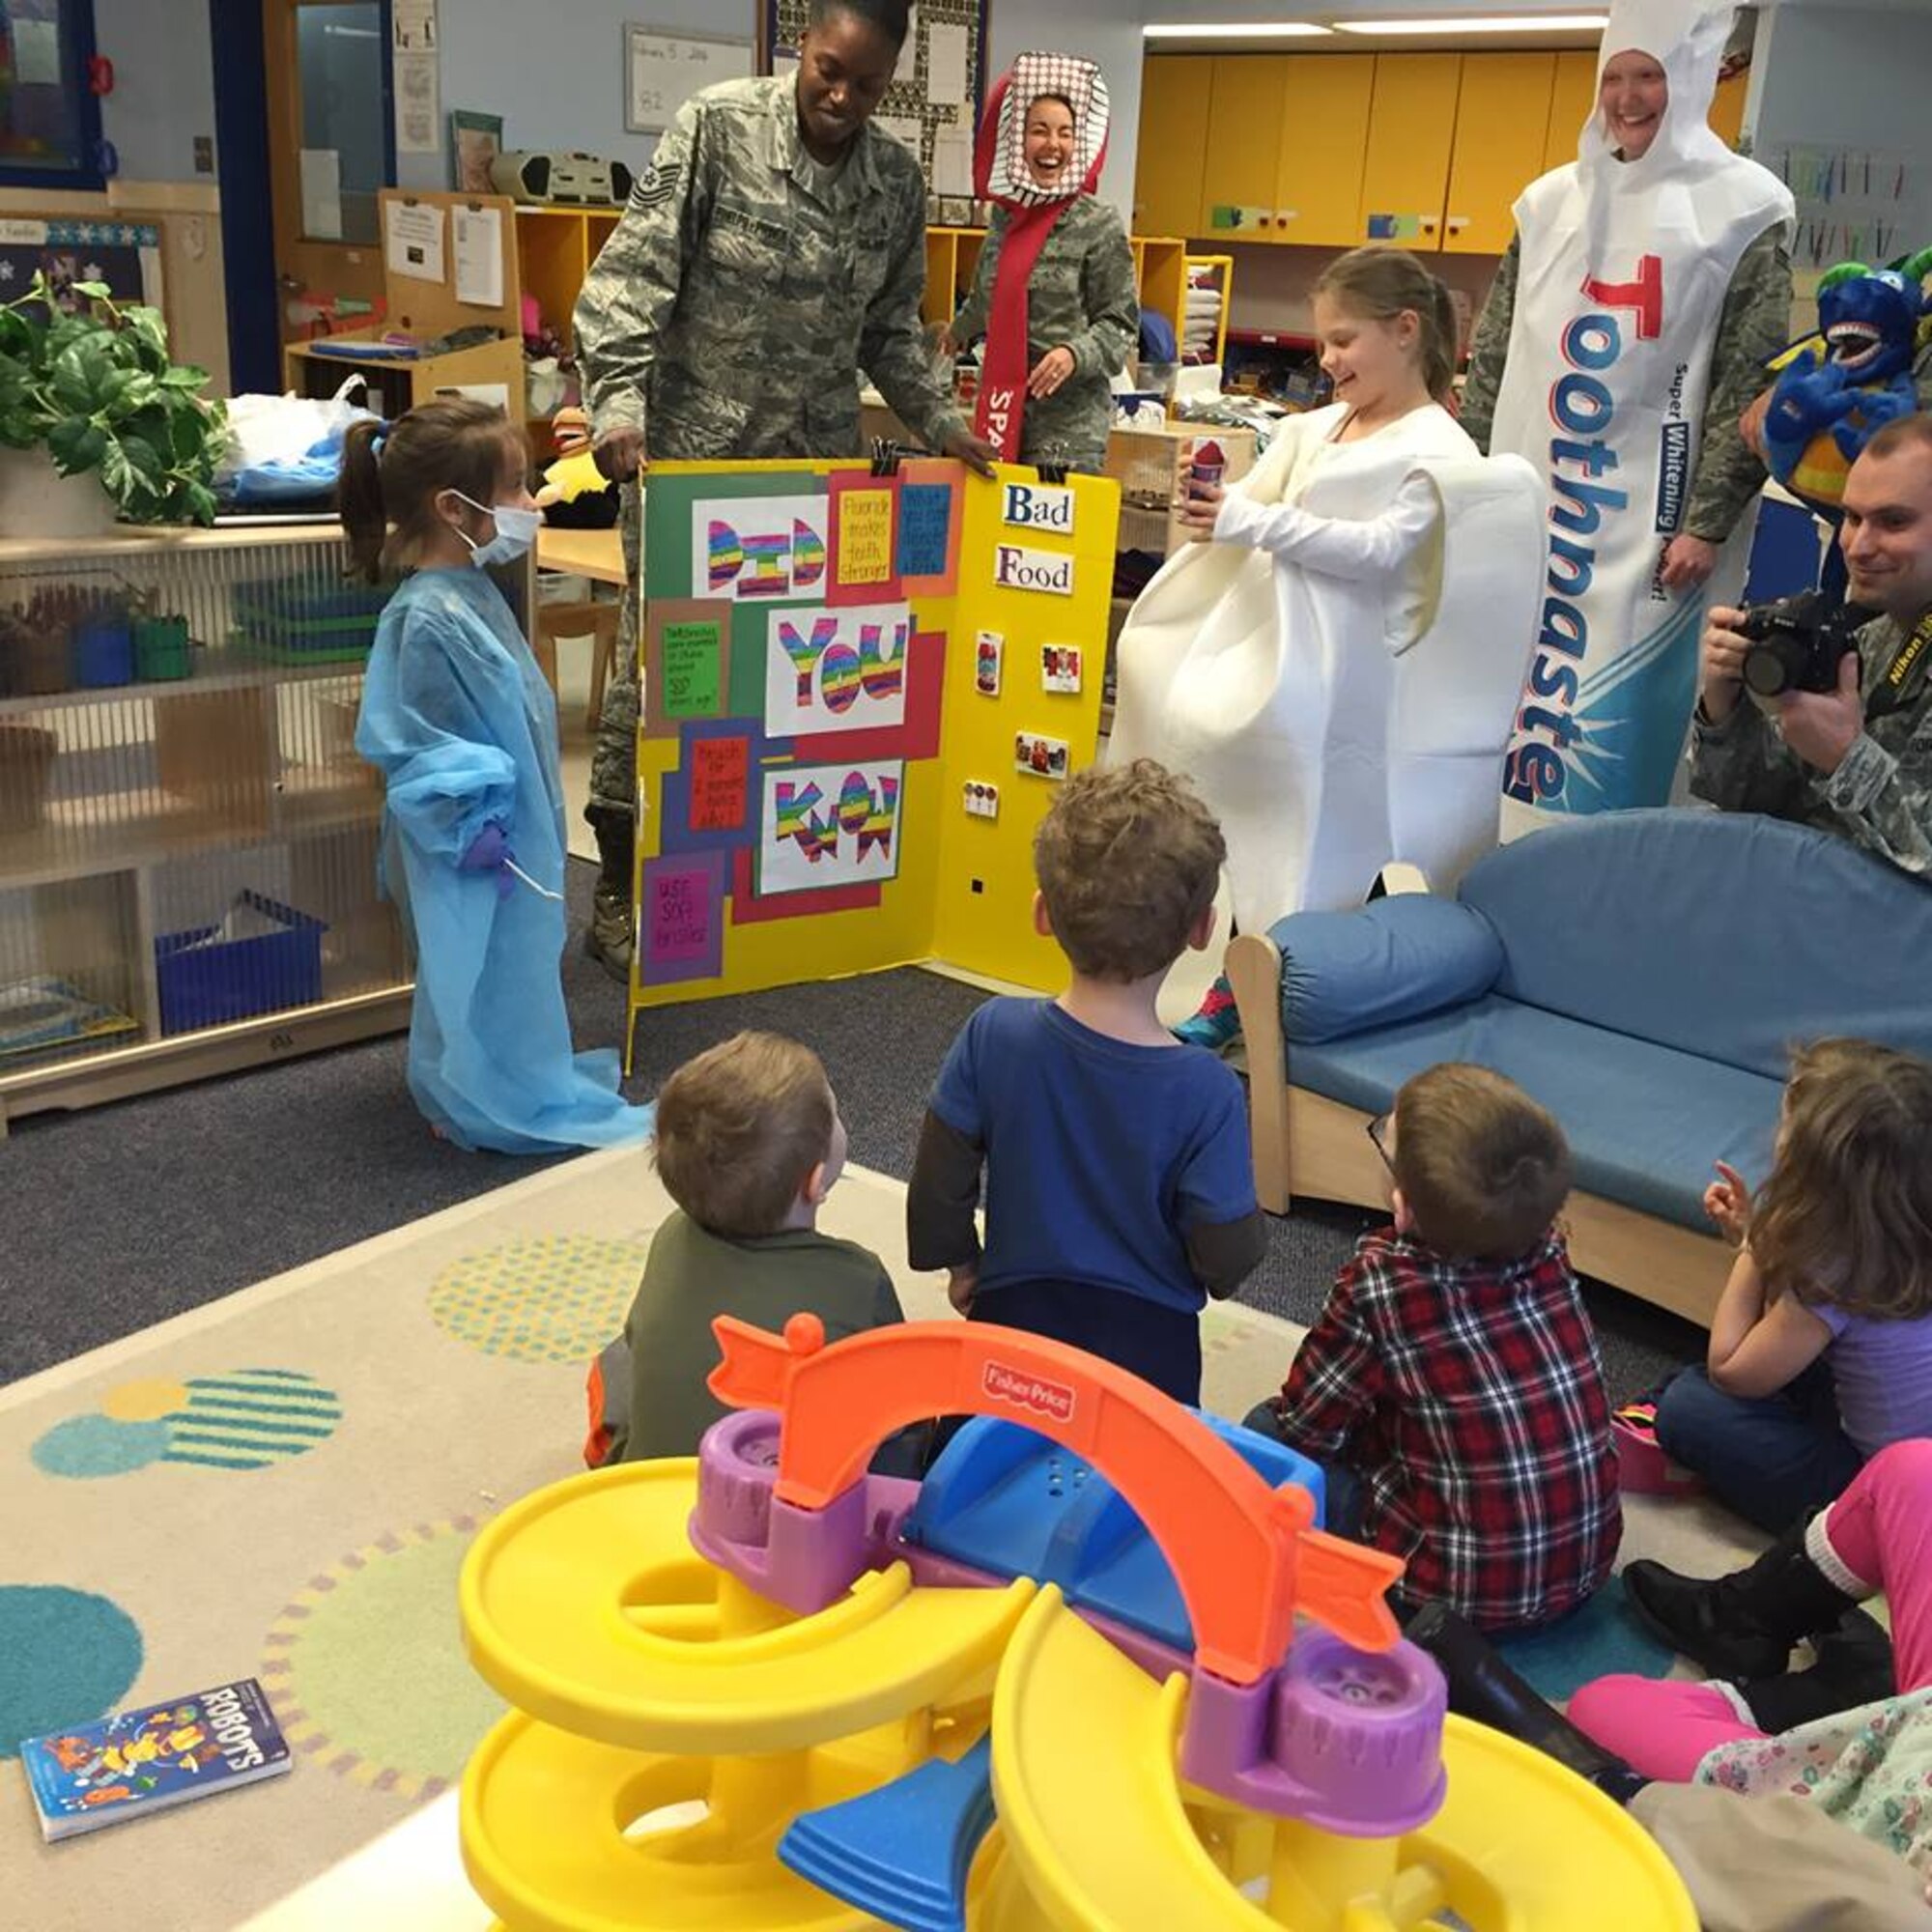 On Feb. 5, members of the Dental Squadron from the 779th Medical Group went to the Child Development Center on Joint Base Andrews to teach the kids about good dental health. (AF photo by Melanie Moore/Released)

